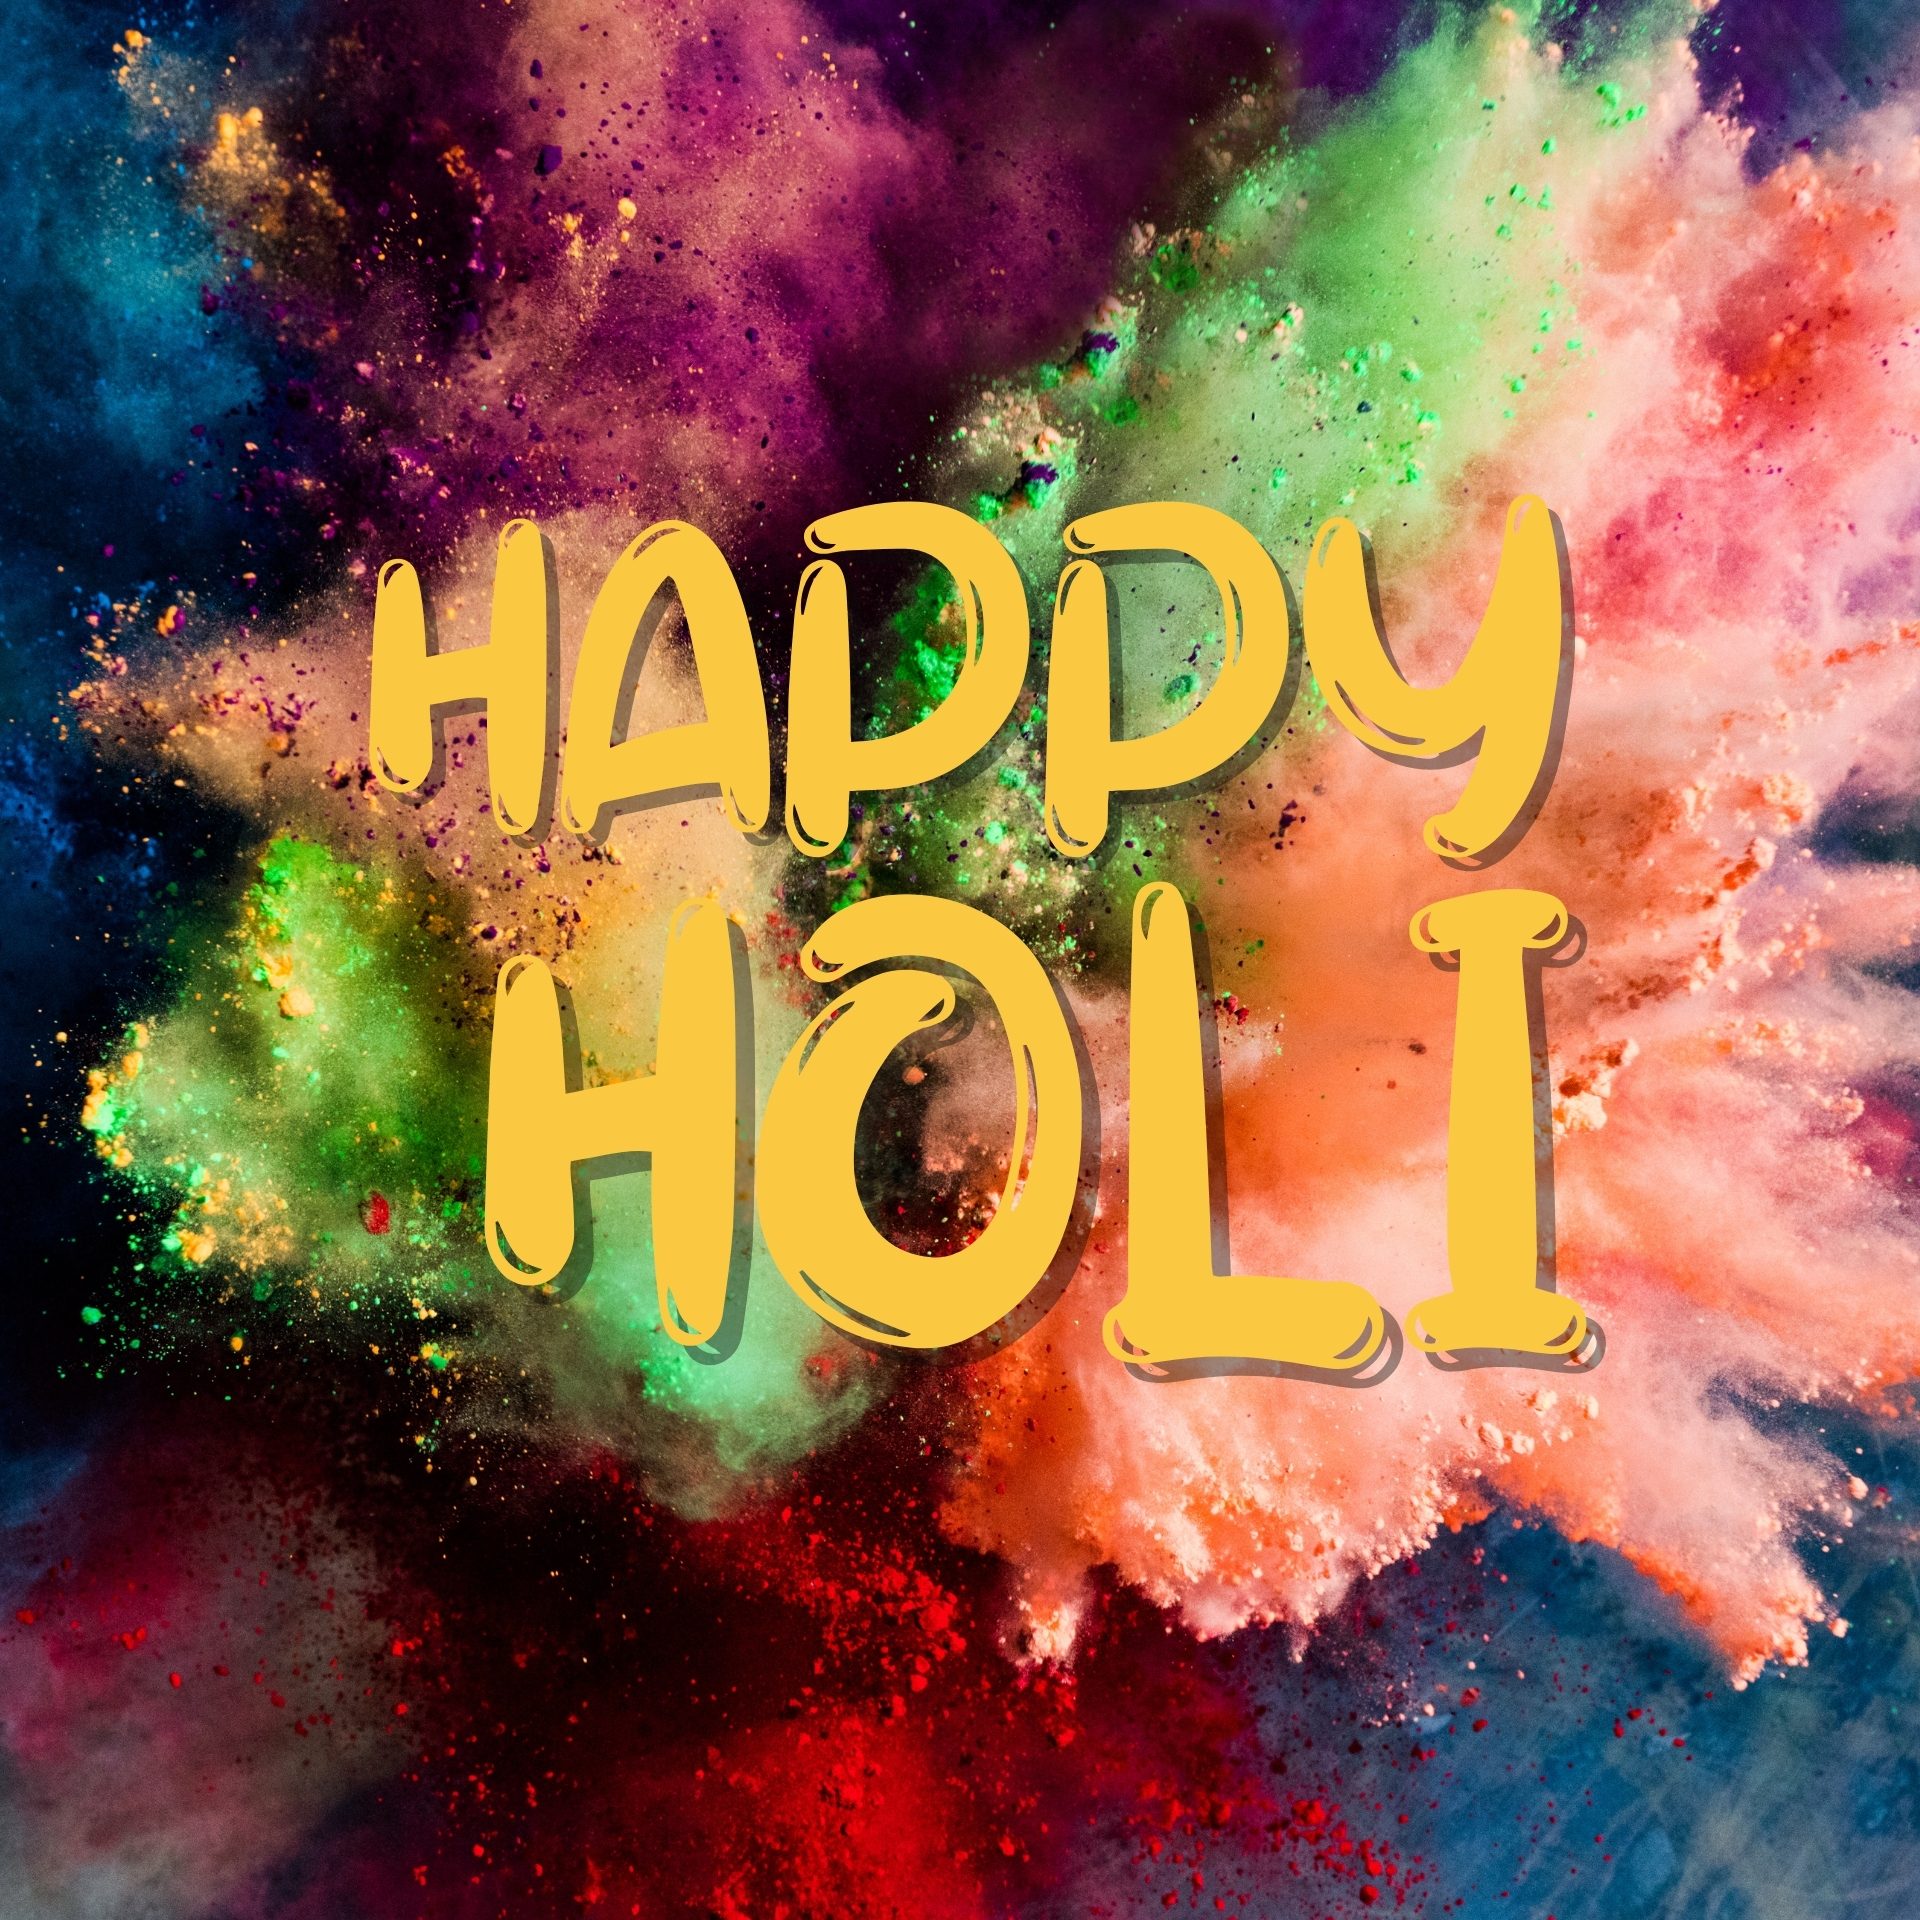 Happy Holi Images, Pictures, Wallpapers, Pics, Photos Download